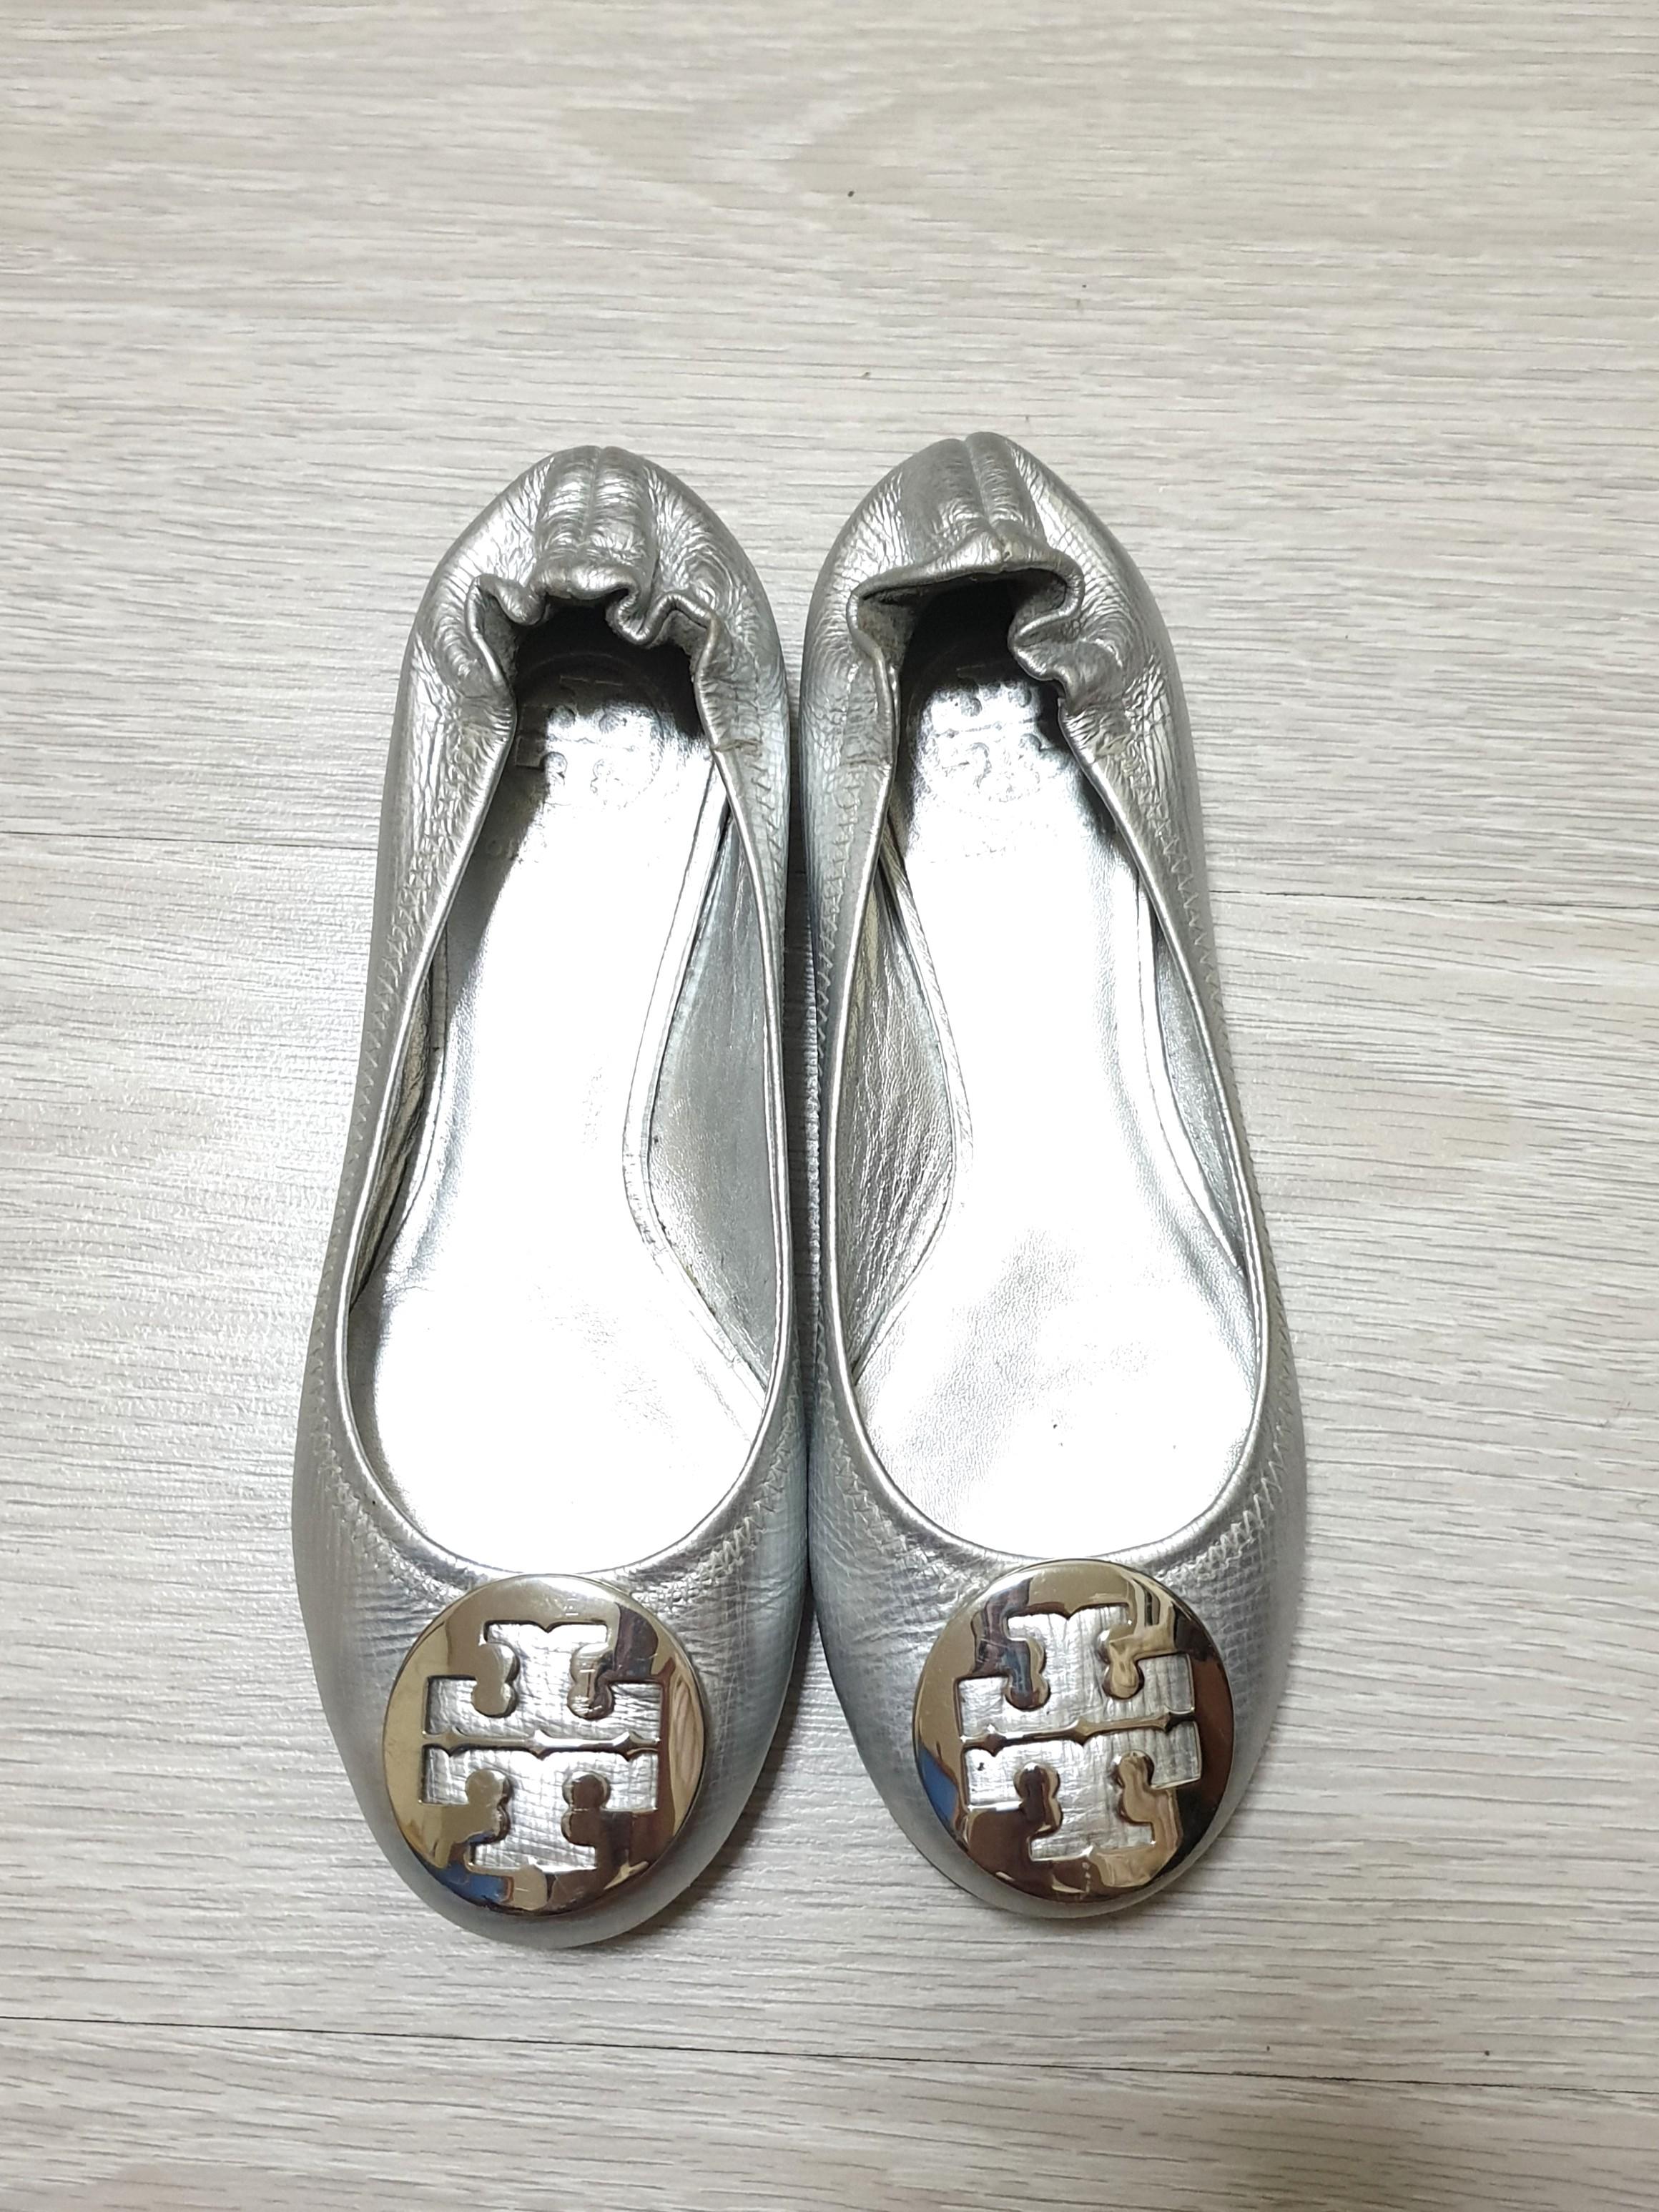 Authentic Tory Burch Ballet Flat in 